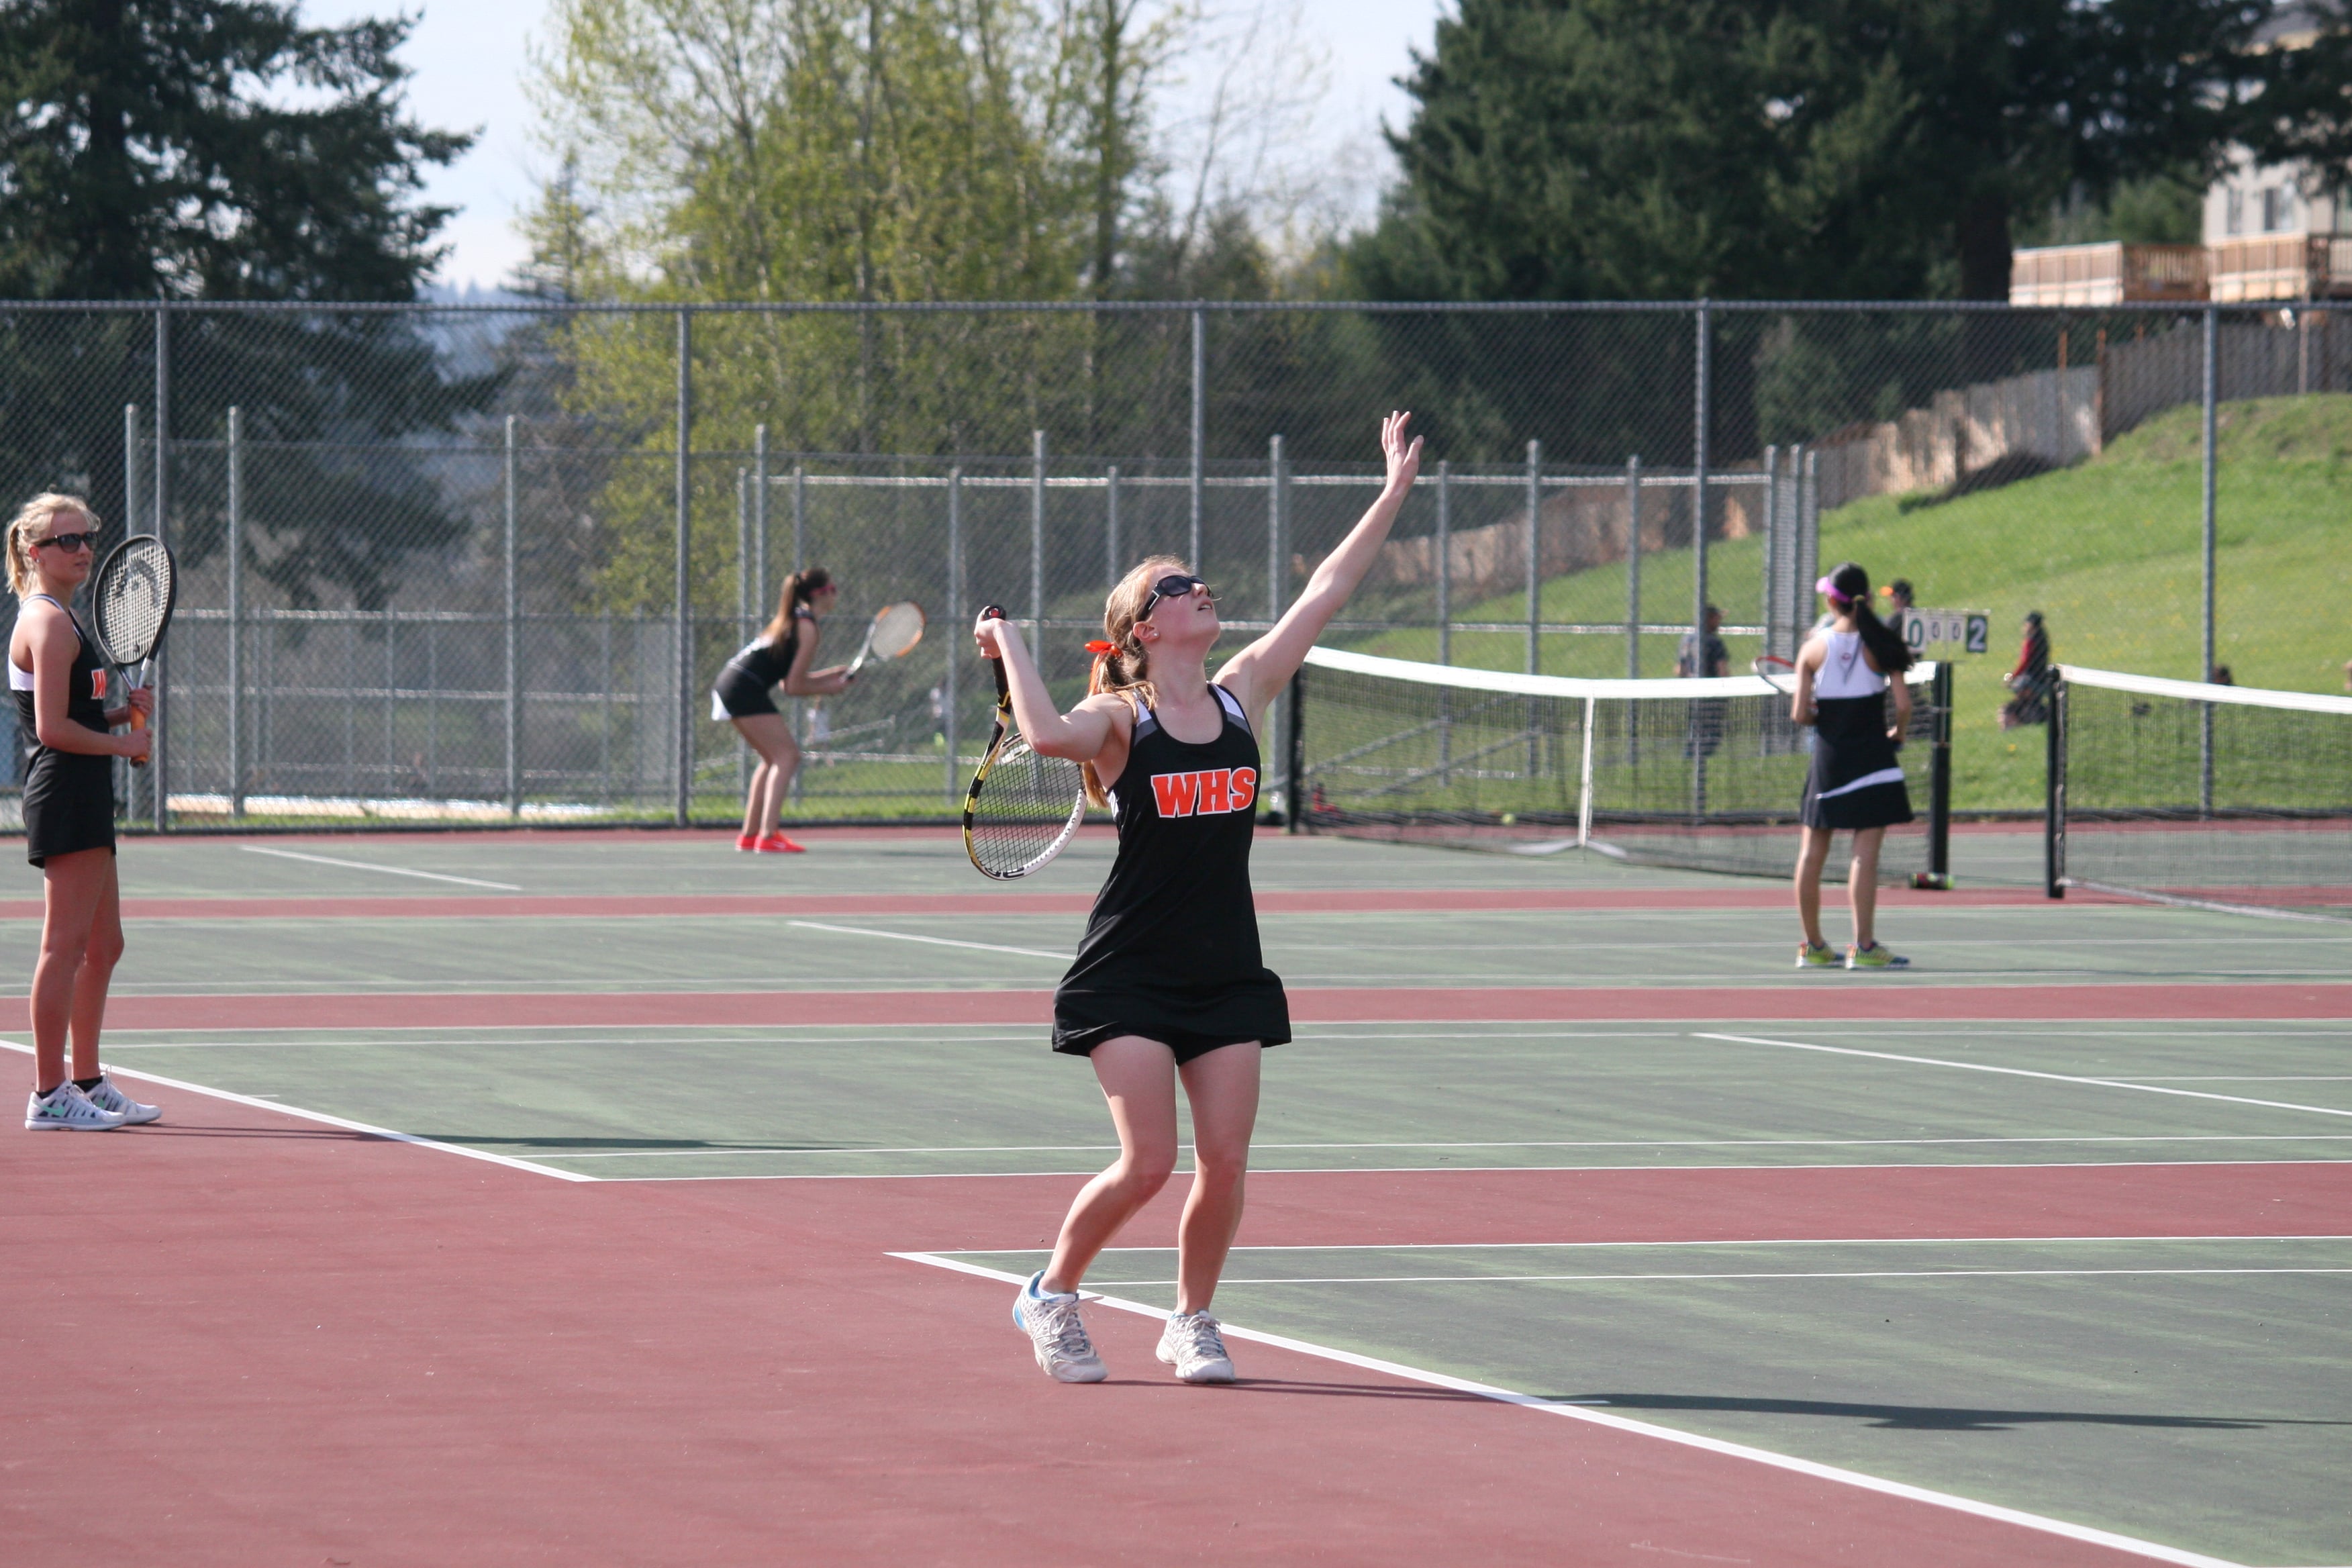 Maddie Gregory serves for Washougal.